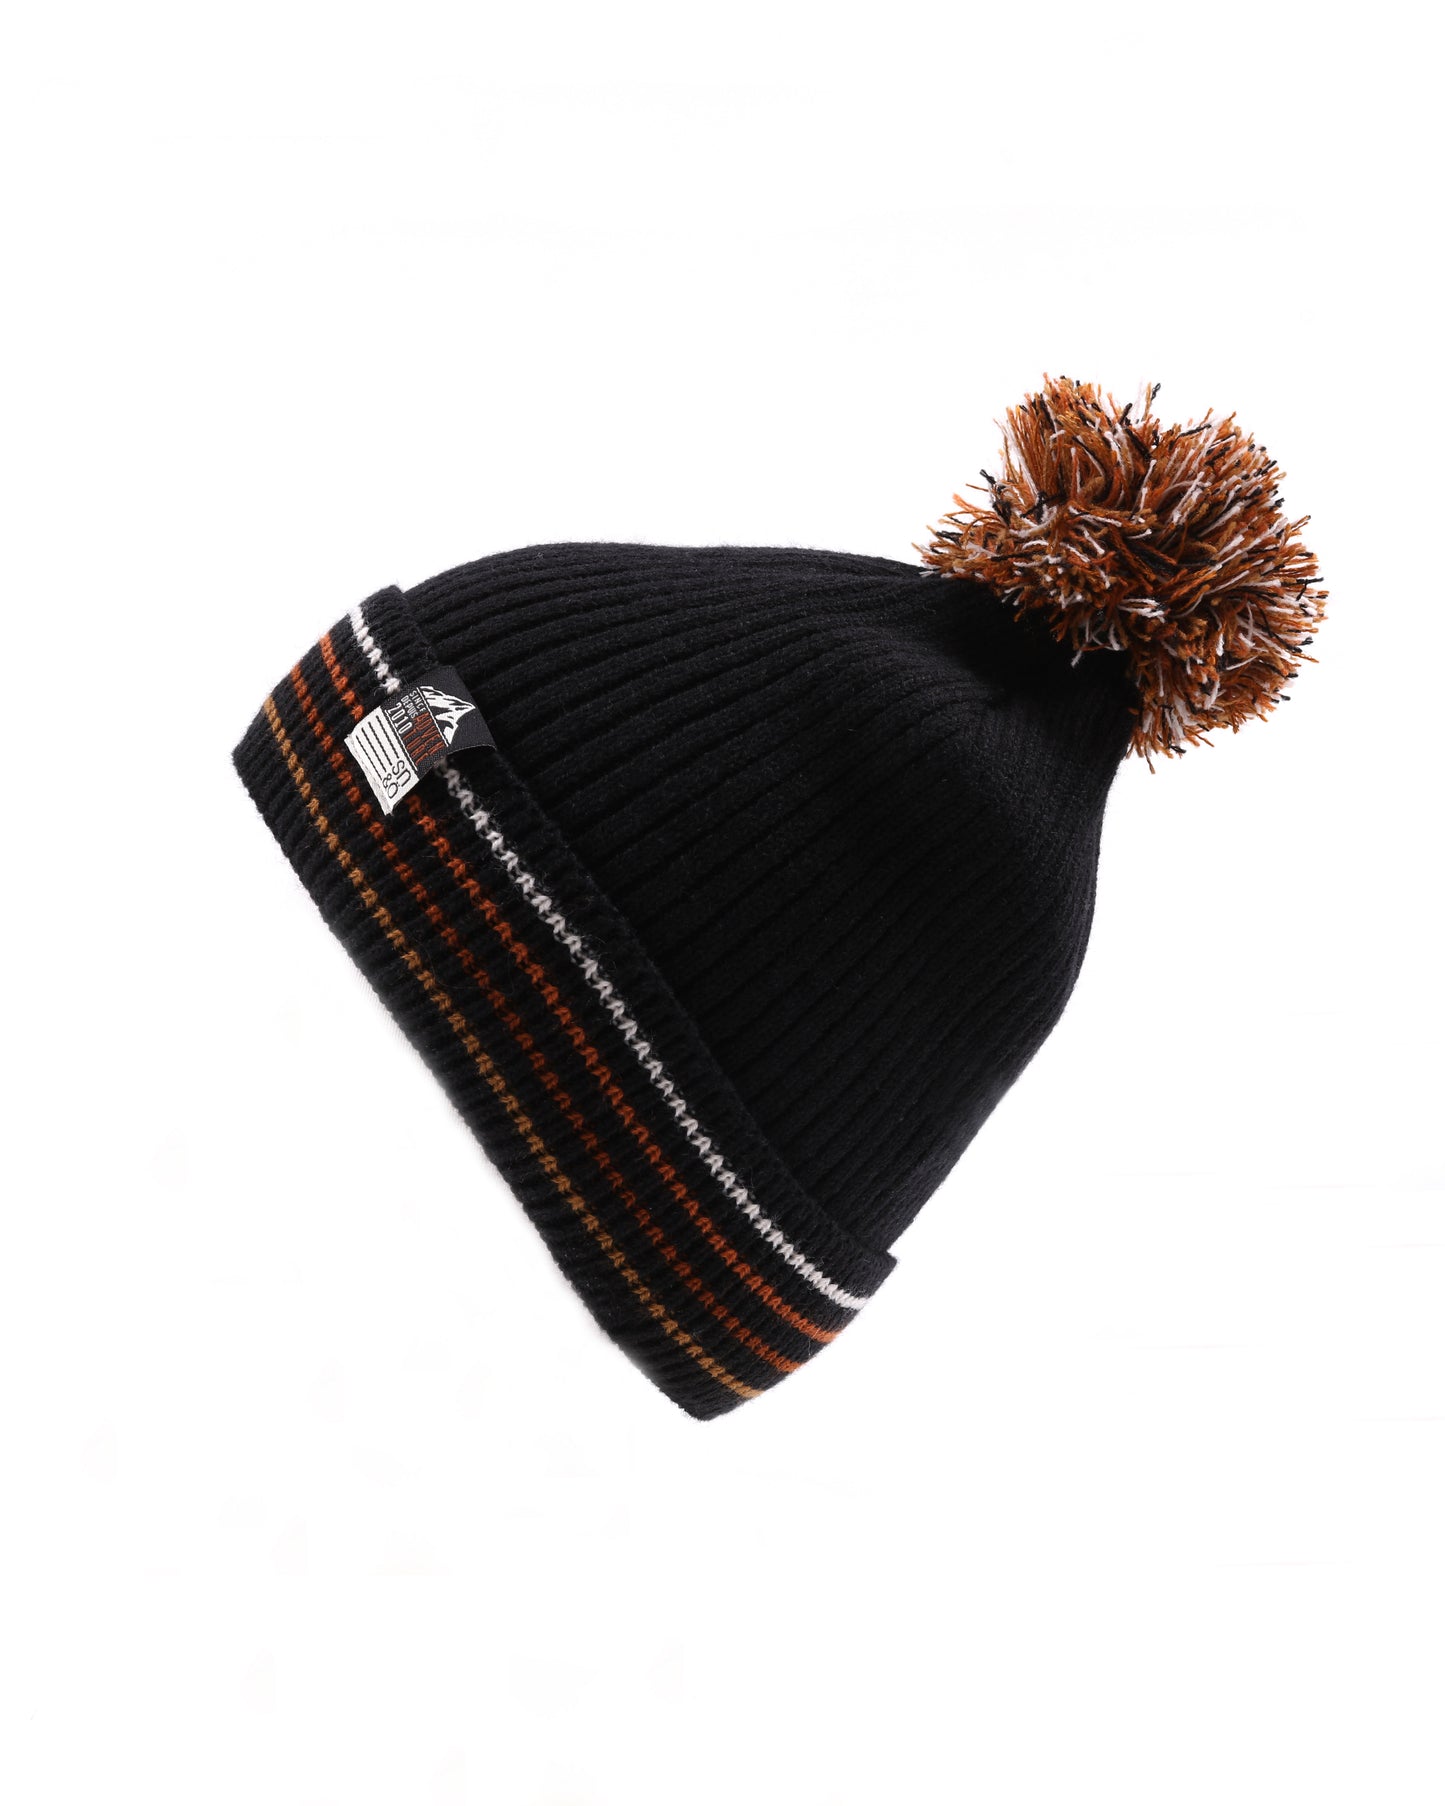 TUQUE TRICOT "360"